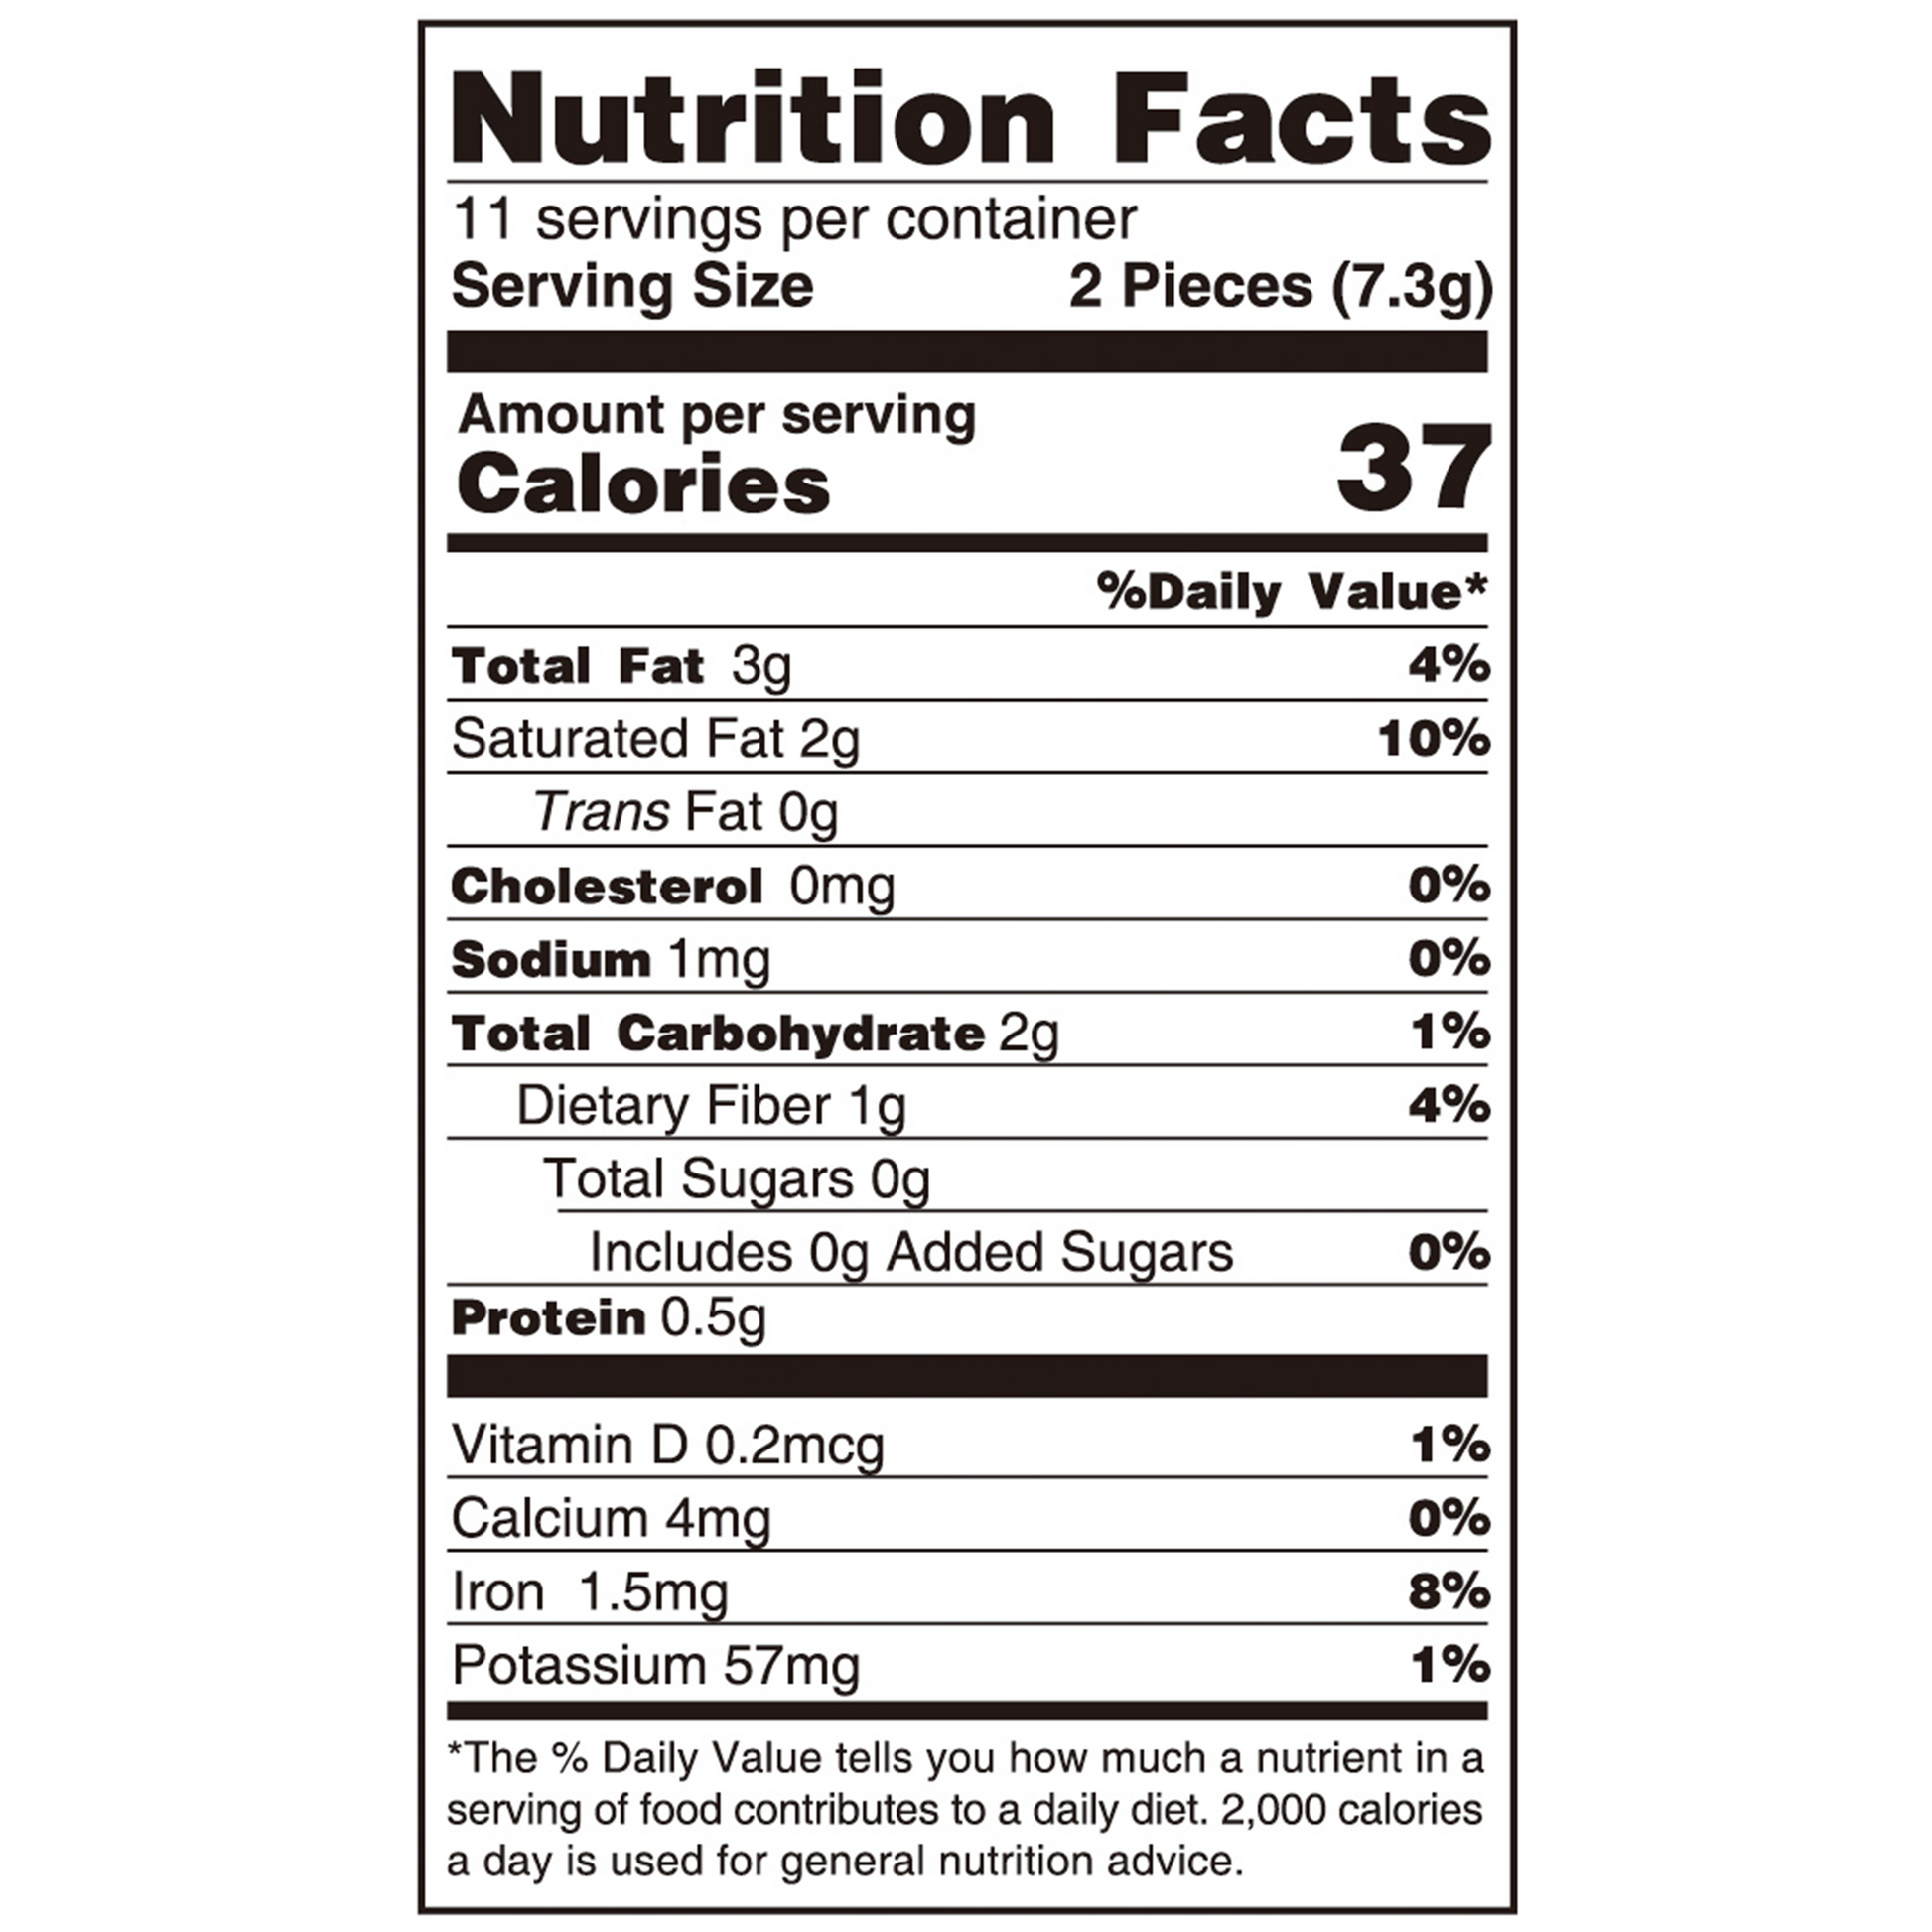 Image of the nutrition facts